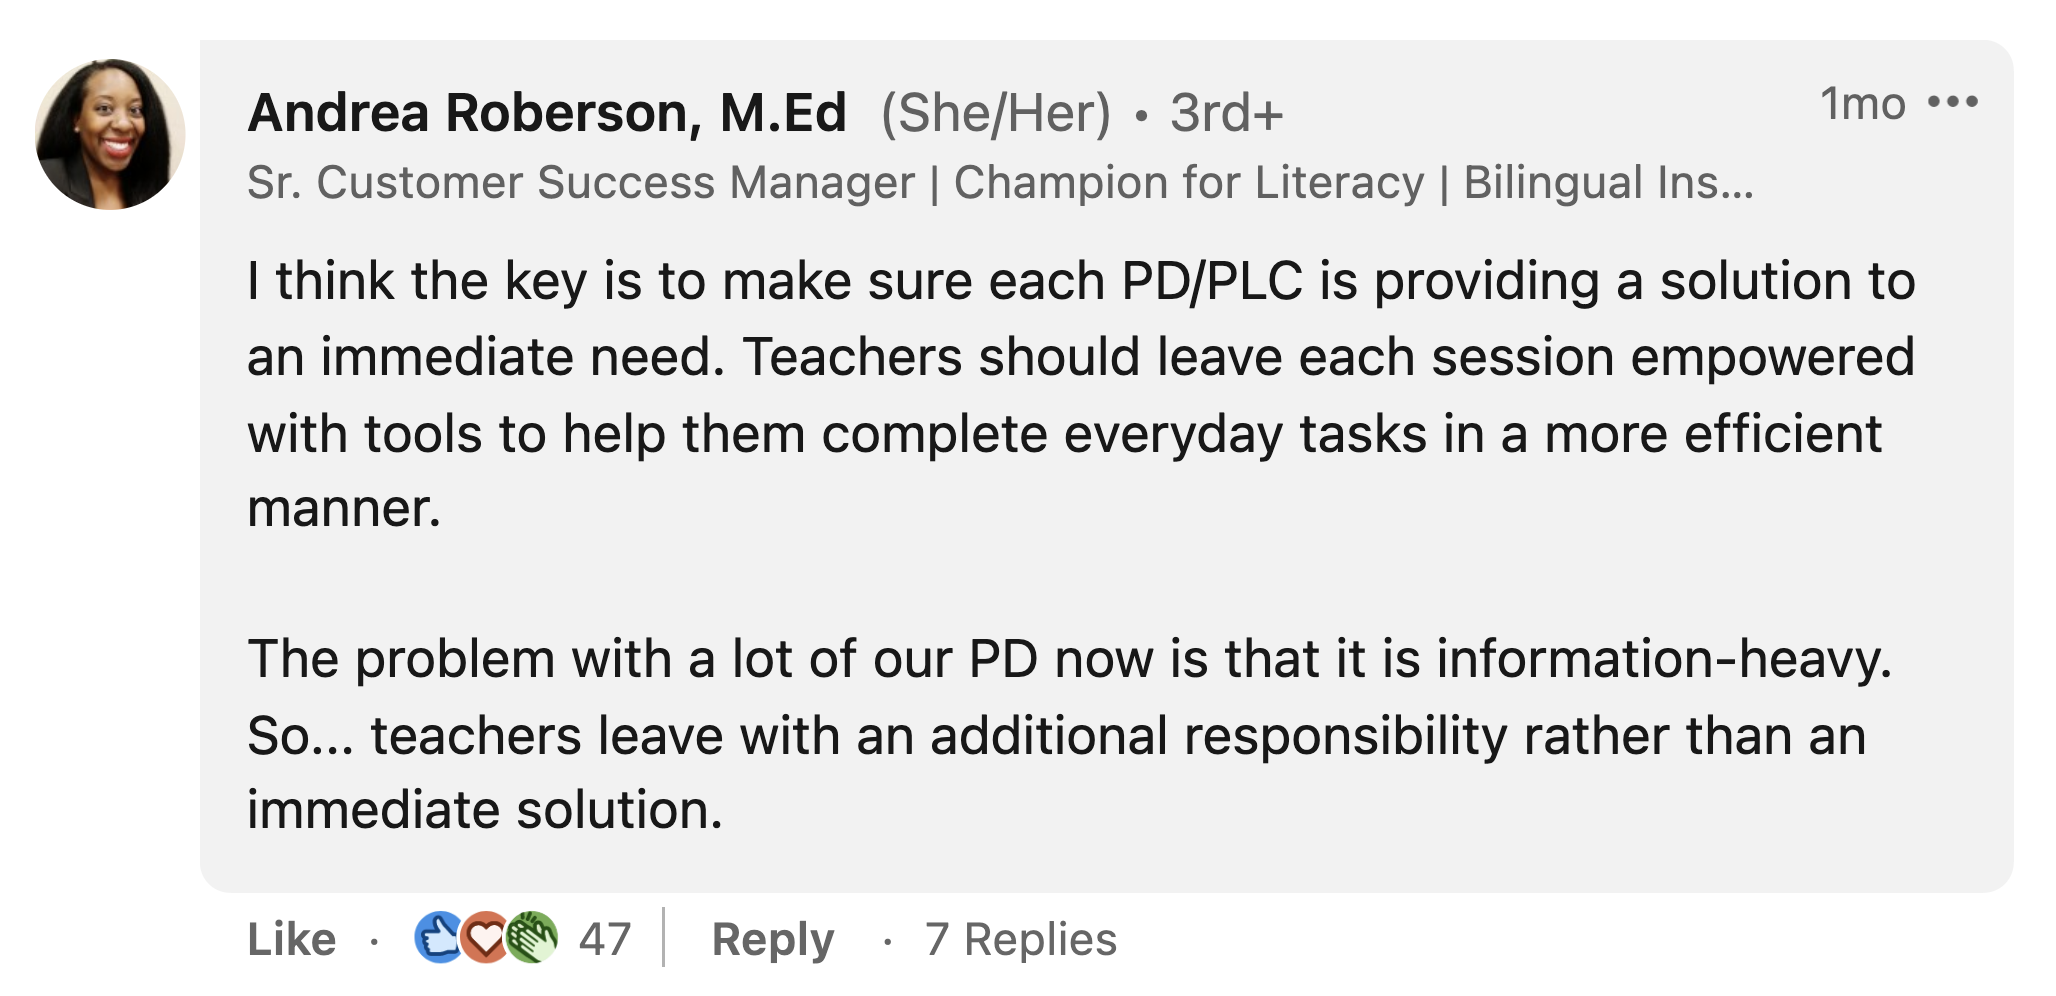 Andrea Roberson: "I think the key is to make sure each PD/PLC is providing a solution to an immediate need. Teachers should leave each session empowered with tools to help them complete everyday tasks in a more efficient manner. The problem with a lot of our PD now is that it is information-heavy. So... teachers leave with an additional responsibility rather than an immediate solution."